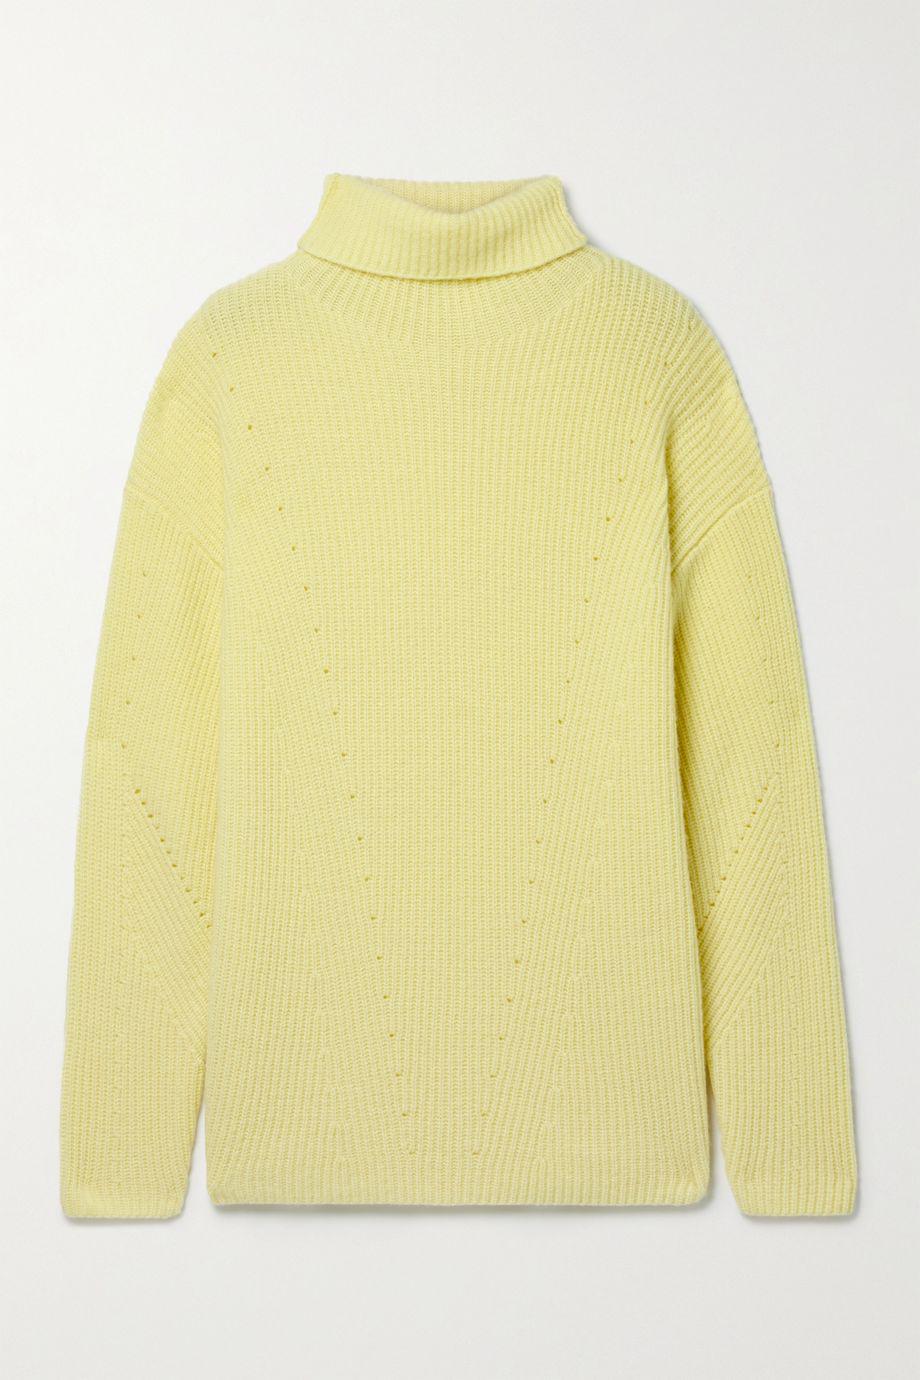 Ribbed cashmere and silk-blend turtleneck sweater by LAPOINTE